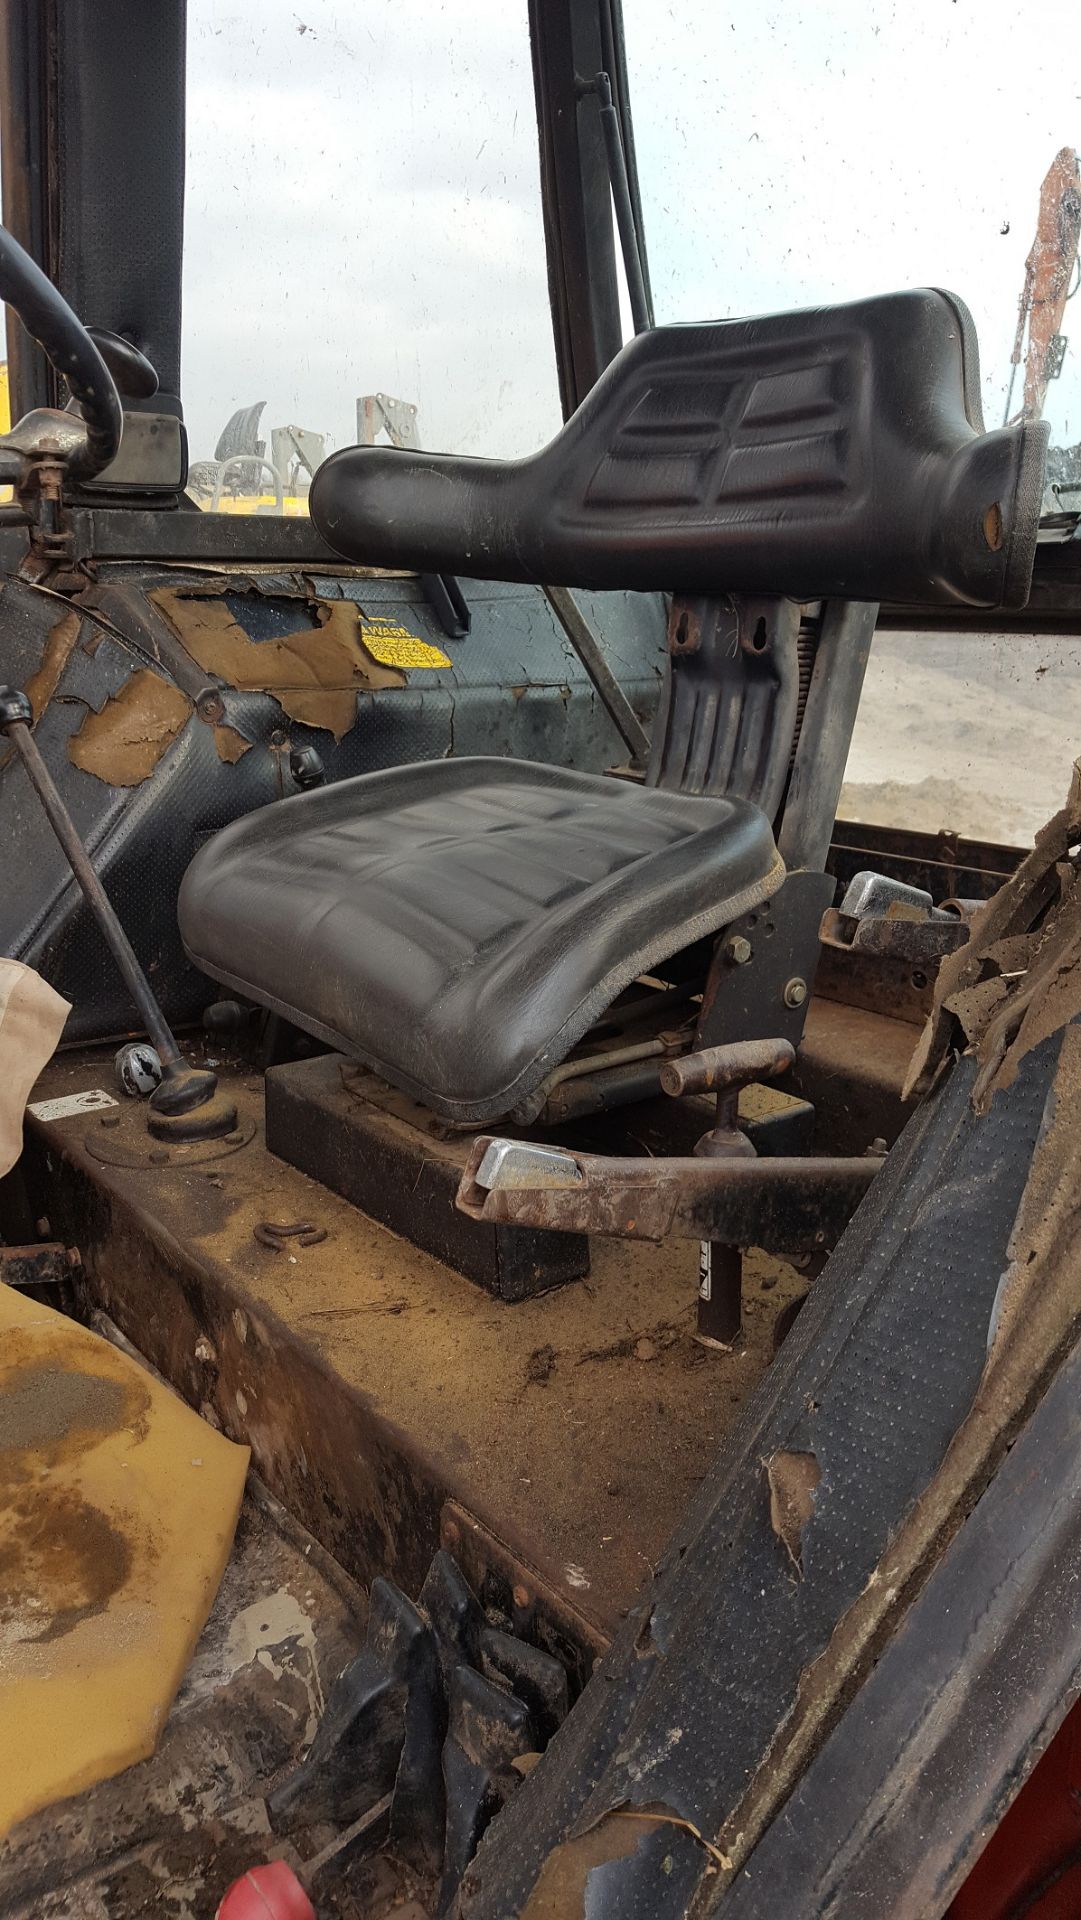 1984 DAVID BROWN CASE 4WD TRACTOR, PTO, 3 POINT LINKAGE, 2 SPOOL VALVES *PLUS VAT* - Image 6 of 9